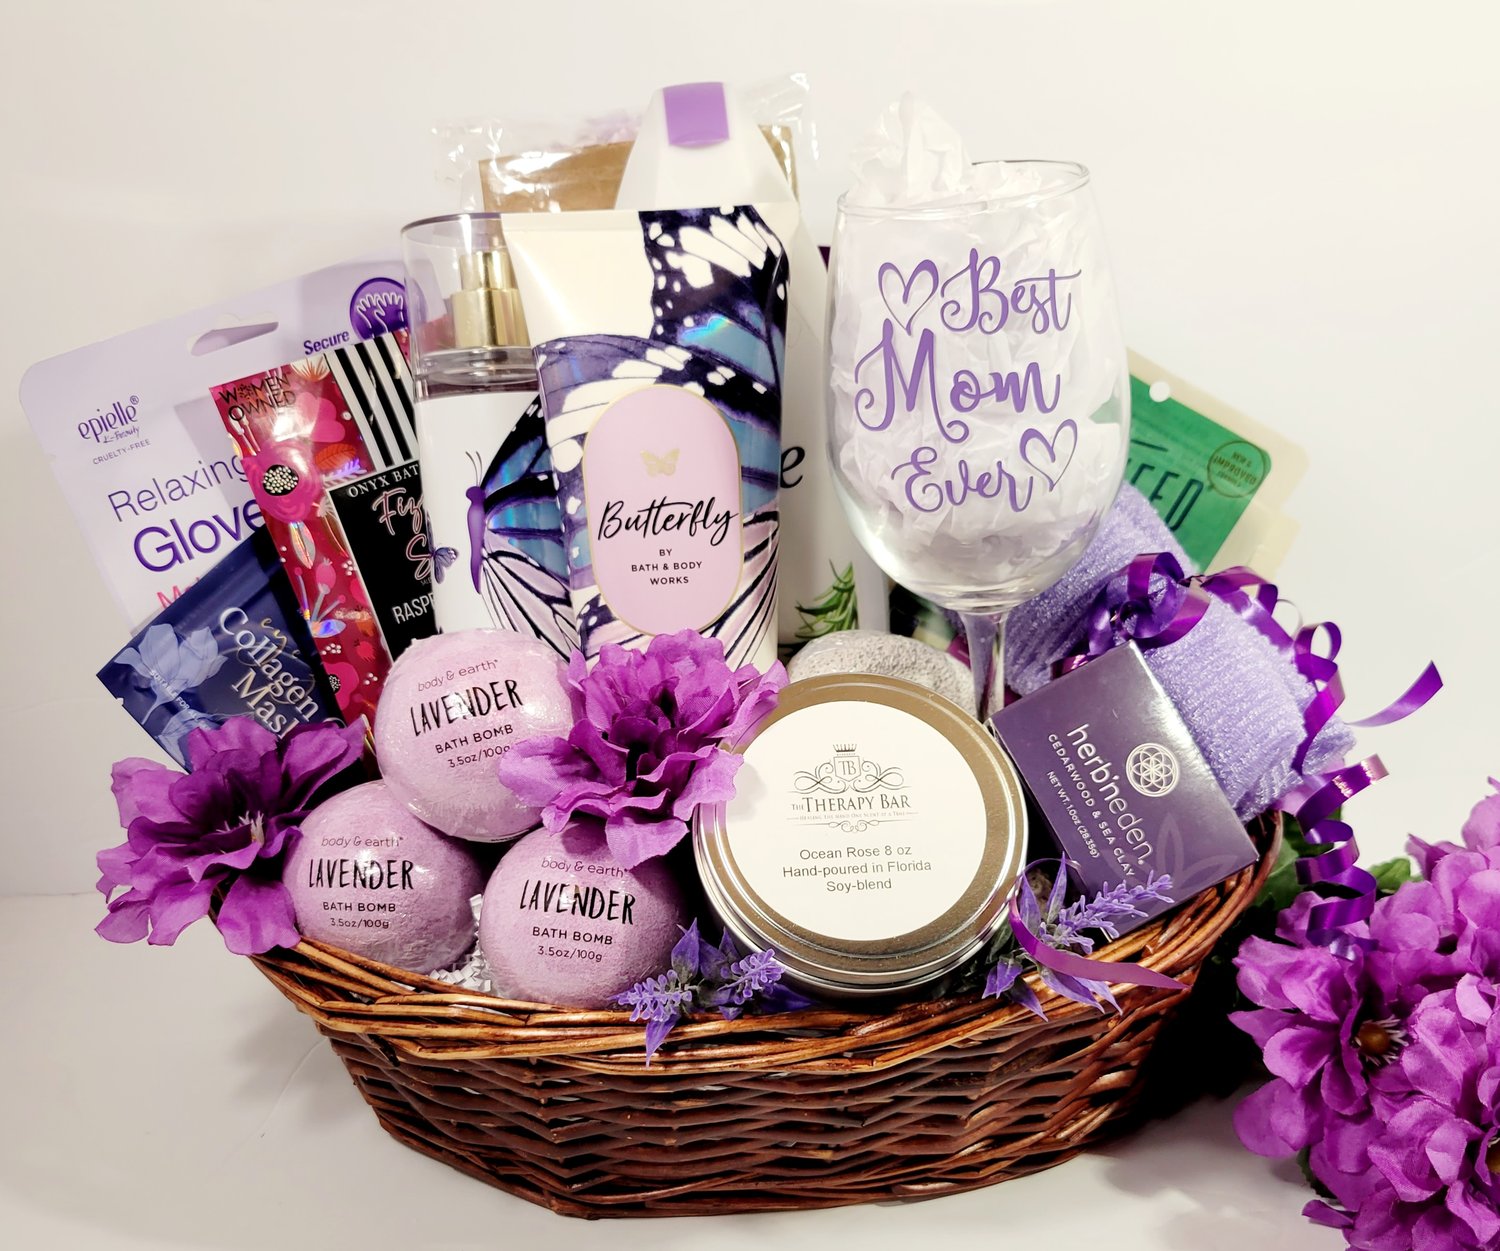 https://assets.bigcartel.com/product_images/359877241/Mothers+Spa+Basket.jpg?auto=format&fit=max&w=1500